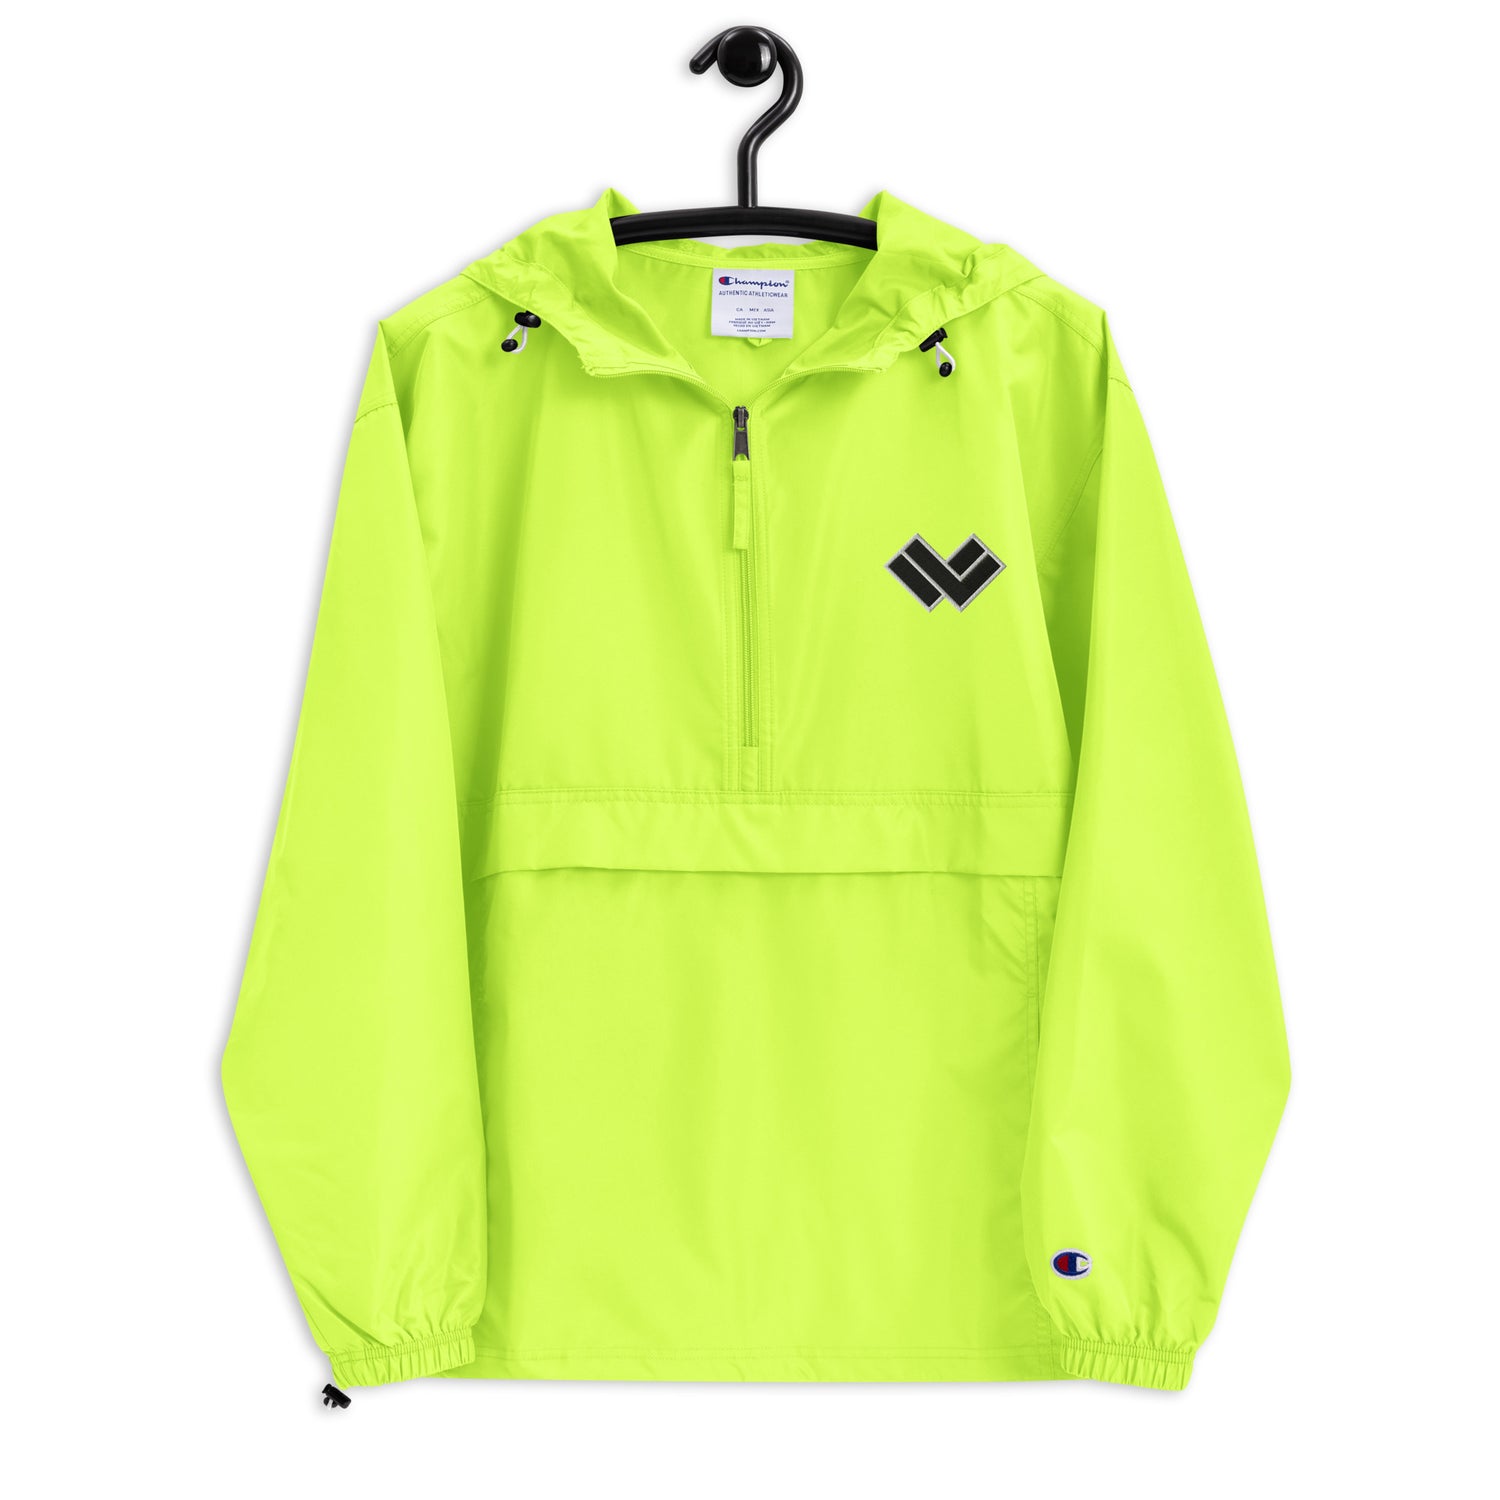 Women's “Lax World x Champion” Cradle Multi-shaded Packable Lacrosse Jacket - Green Front 